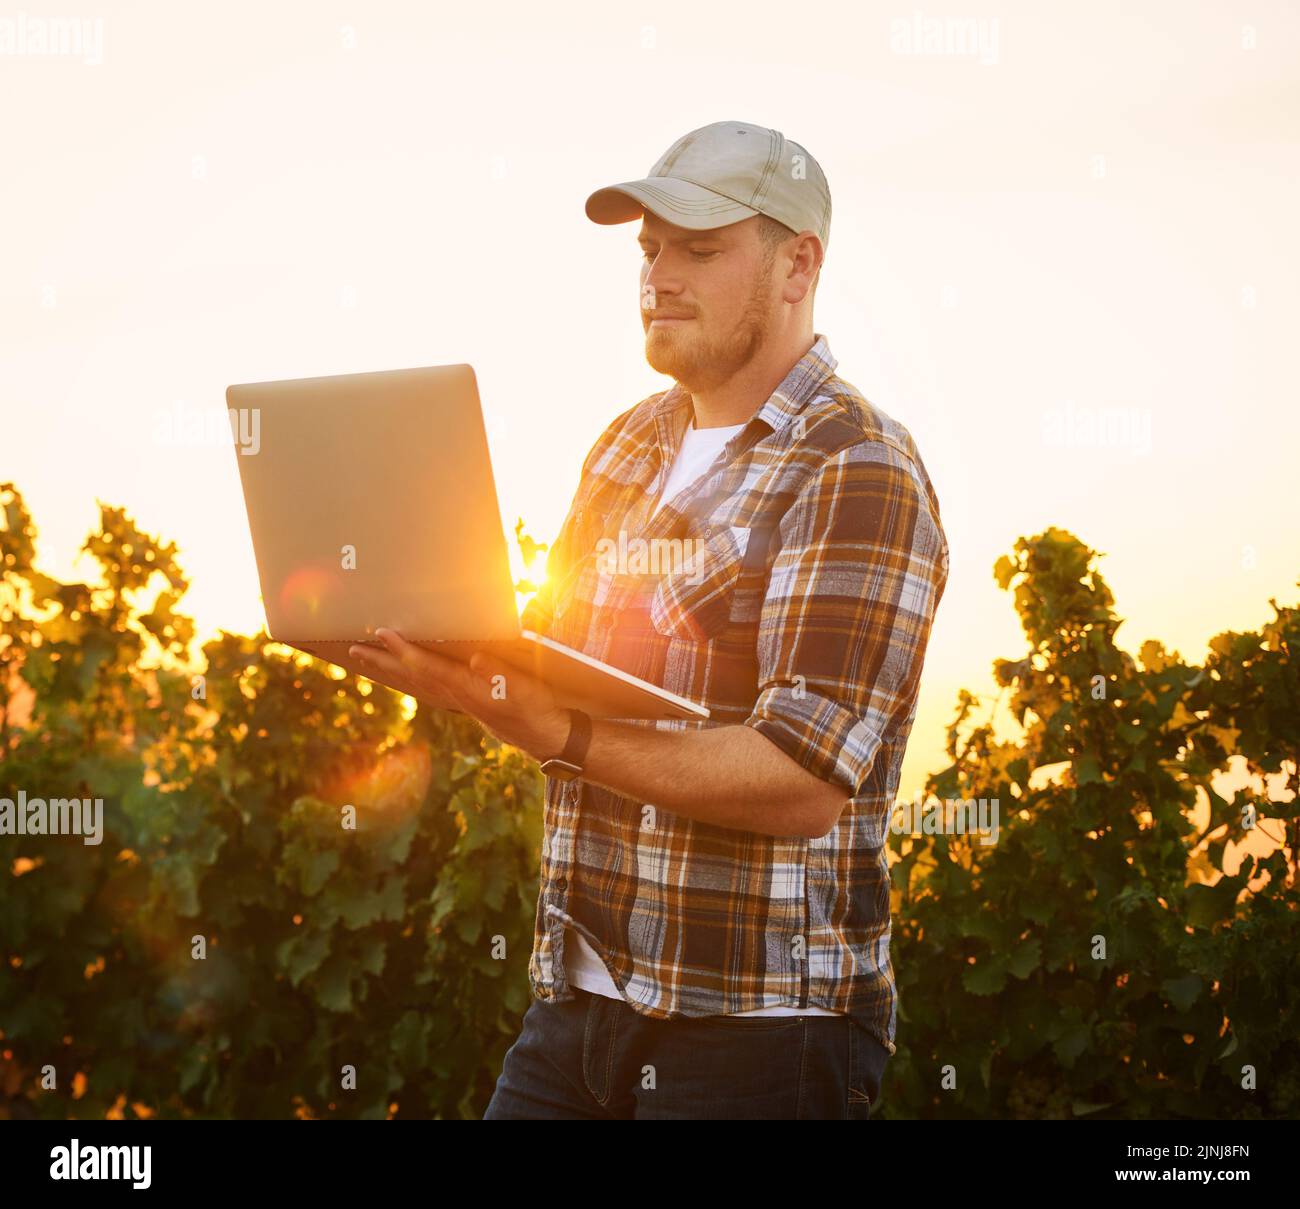 Farmer typing on a laptop outdoors using the internet to plan a harvest and crop growth on a vineyard farm. An agriculture expert using technology to Stock Photo